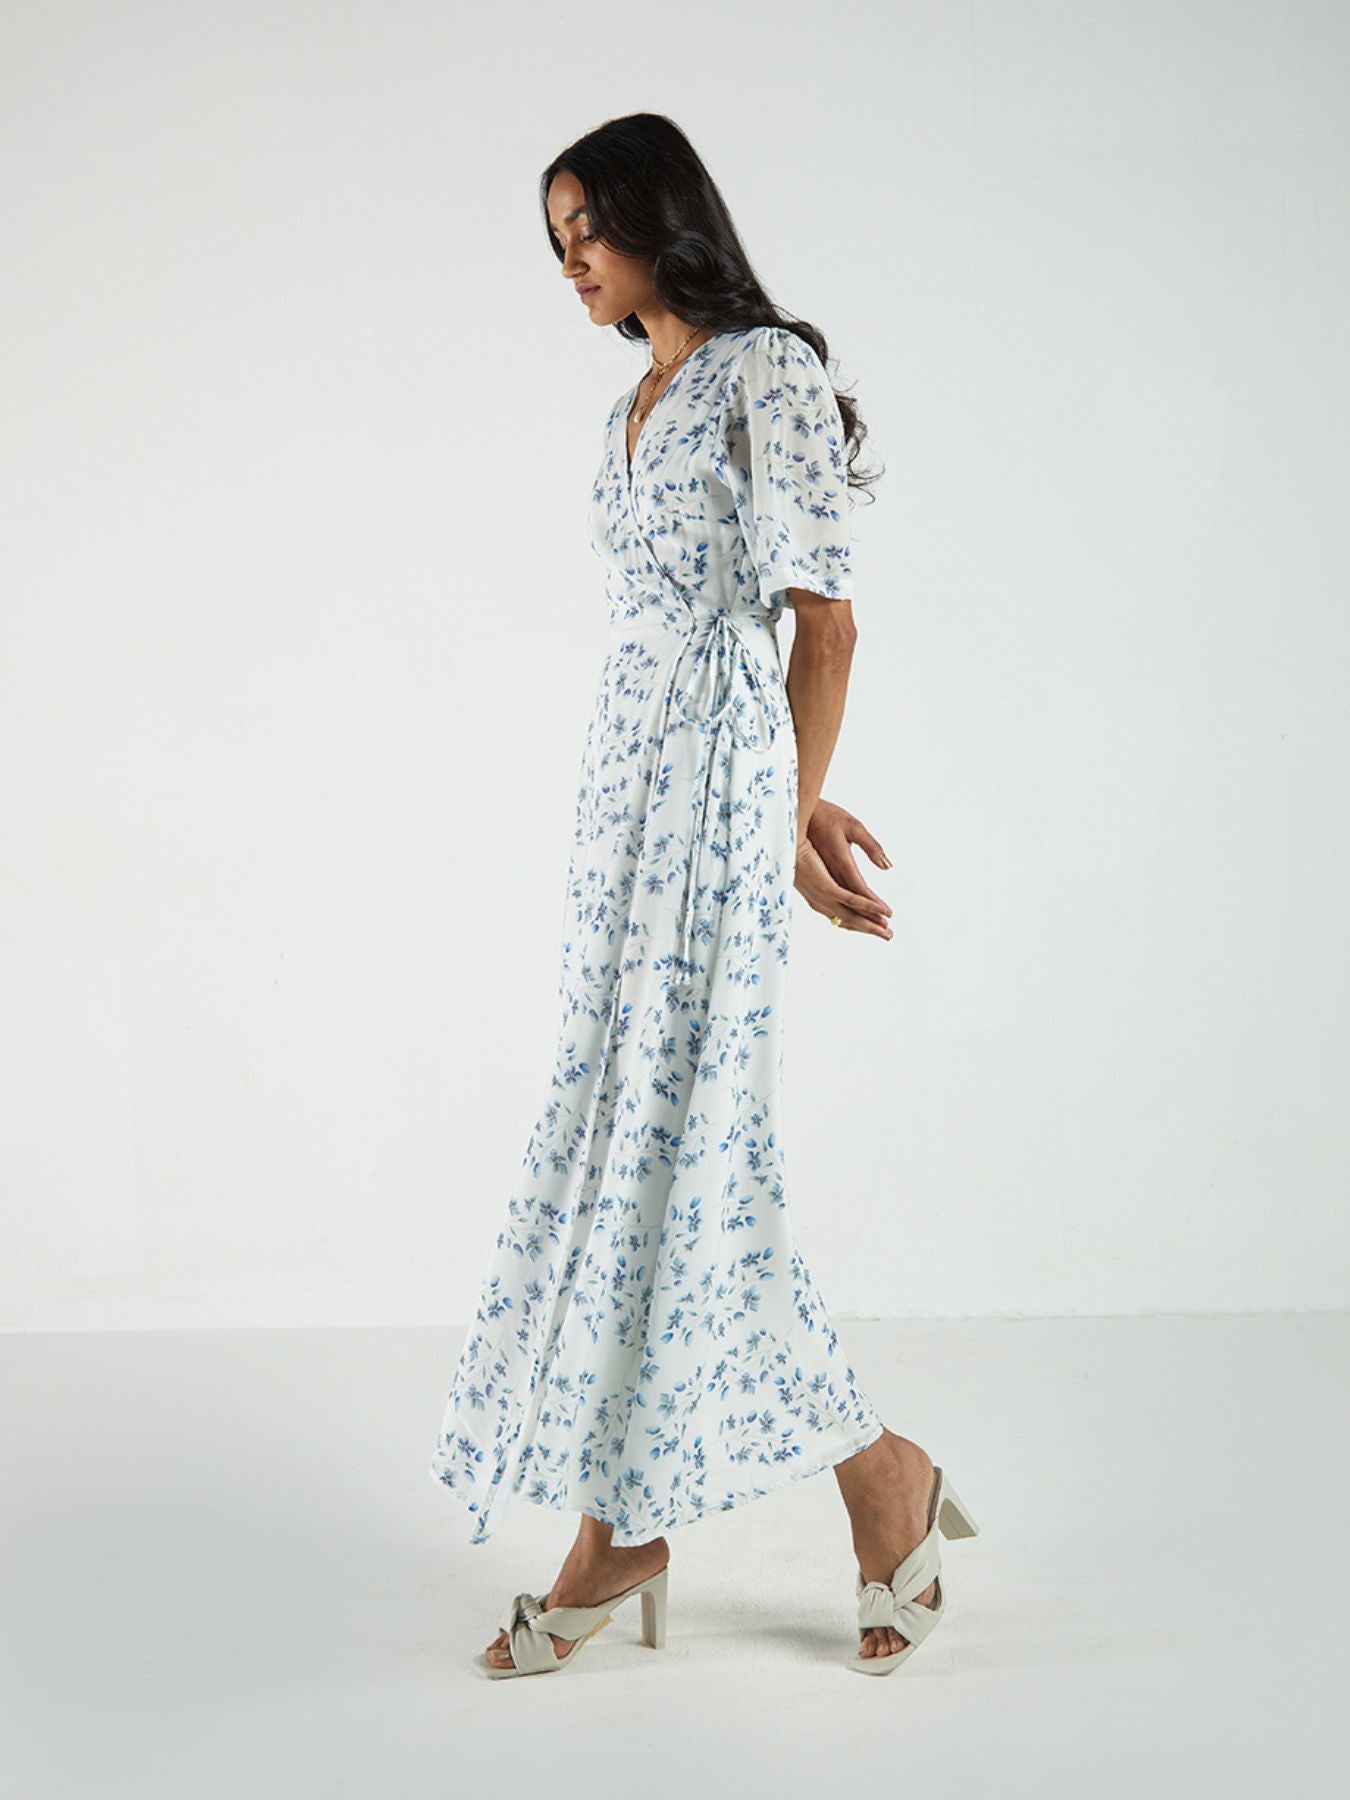 Sustainable Outfits  Sustainable Shopping Guide: Anthropologie Clothing  Brands A-Z